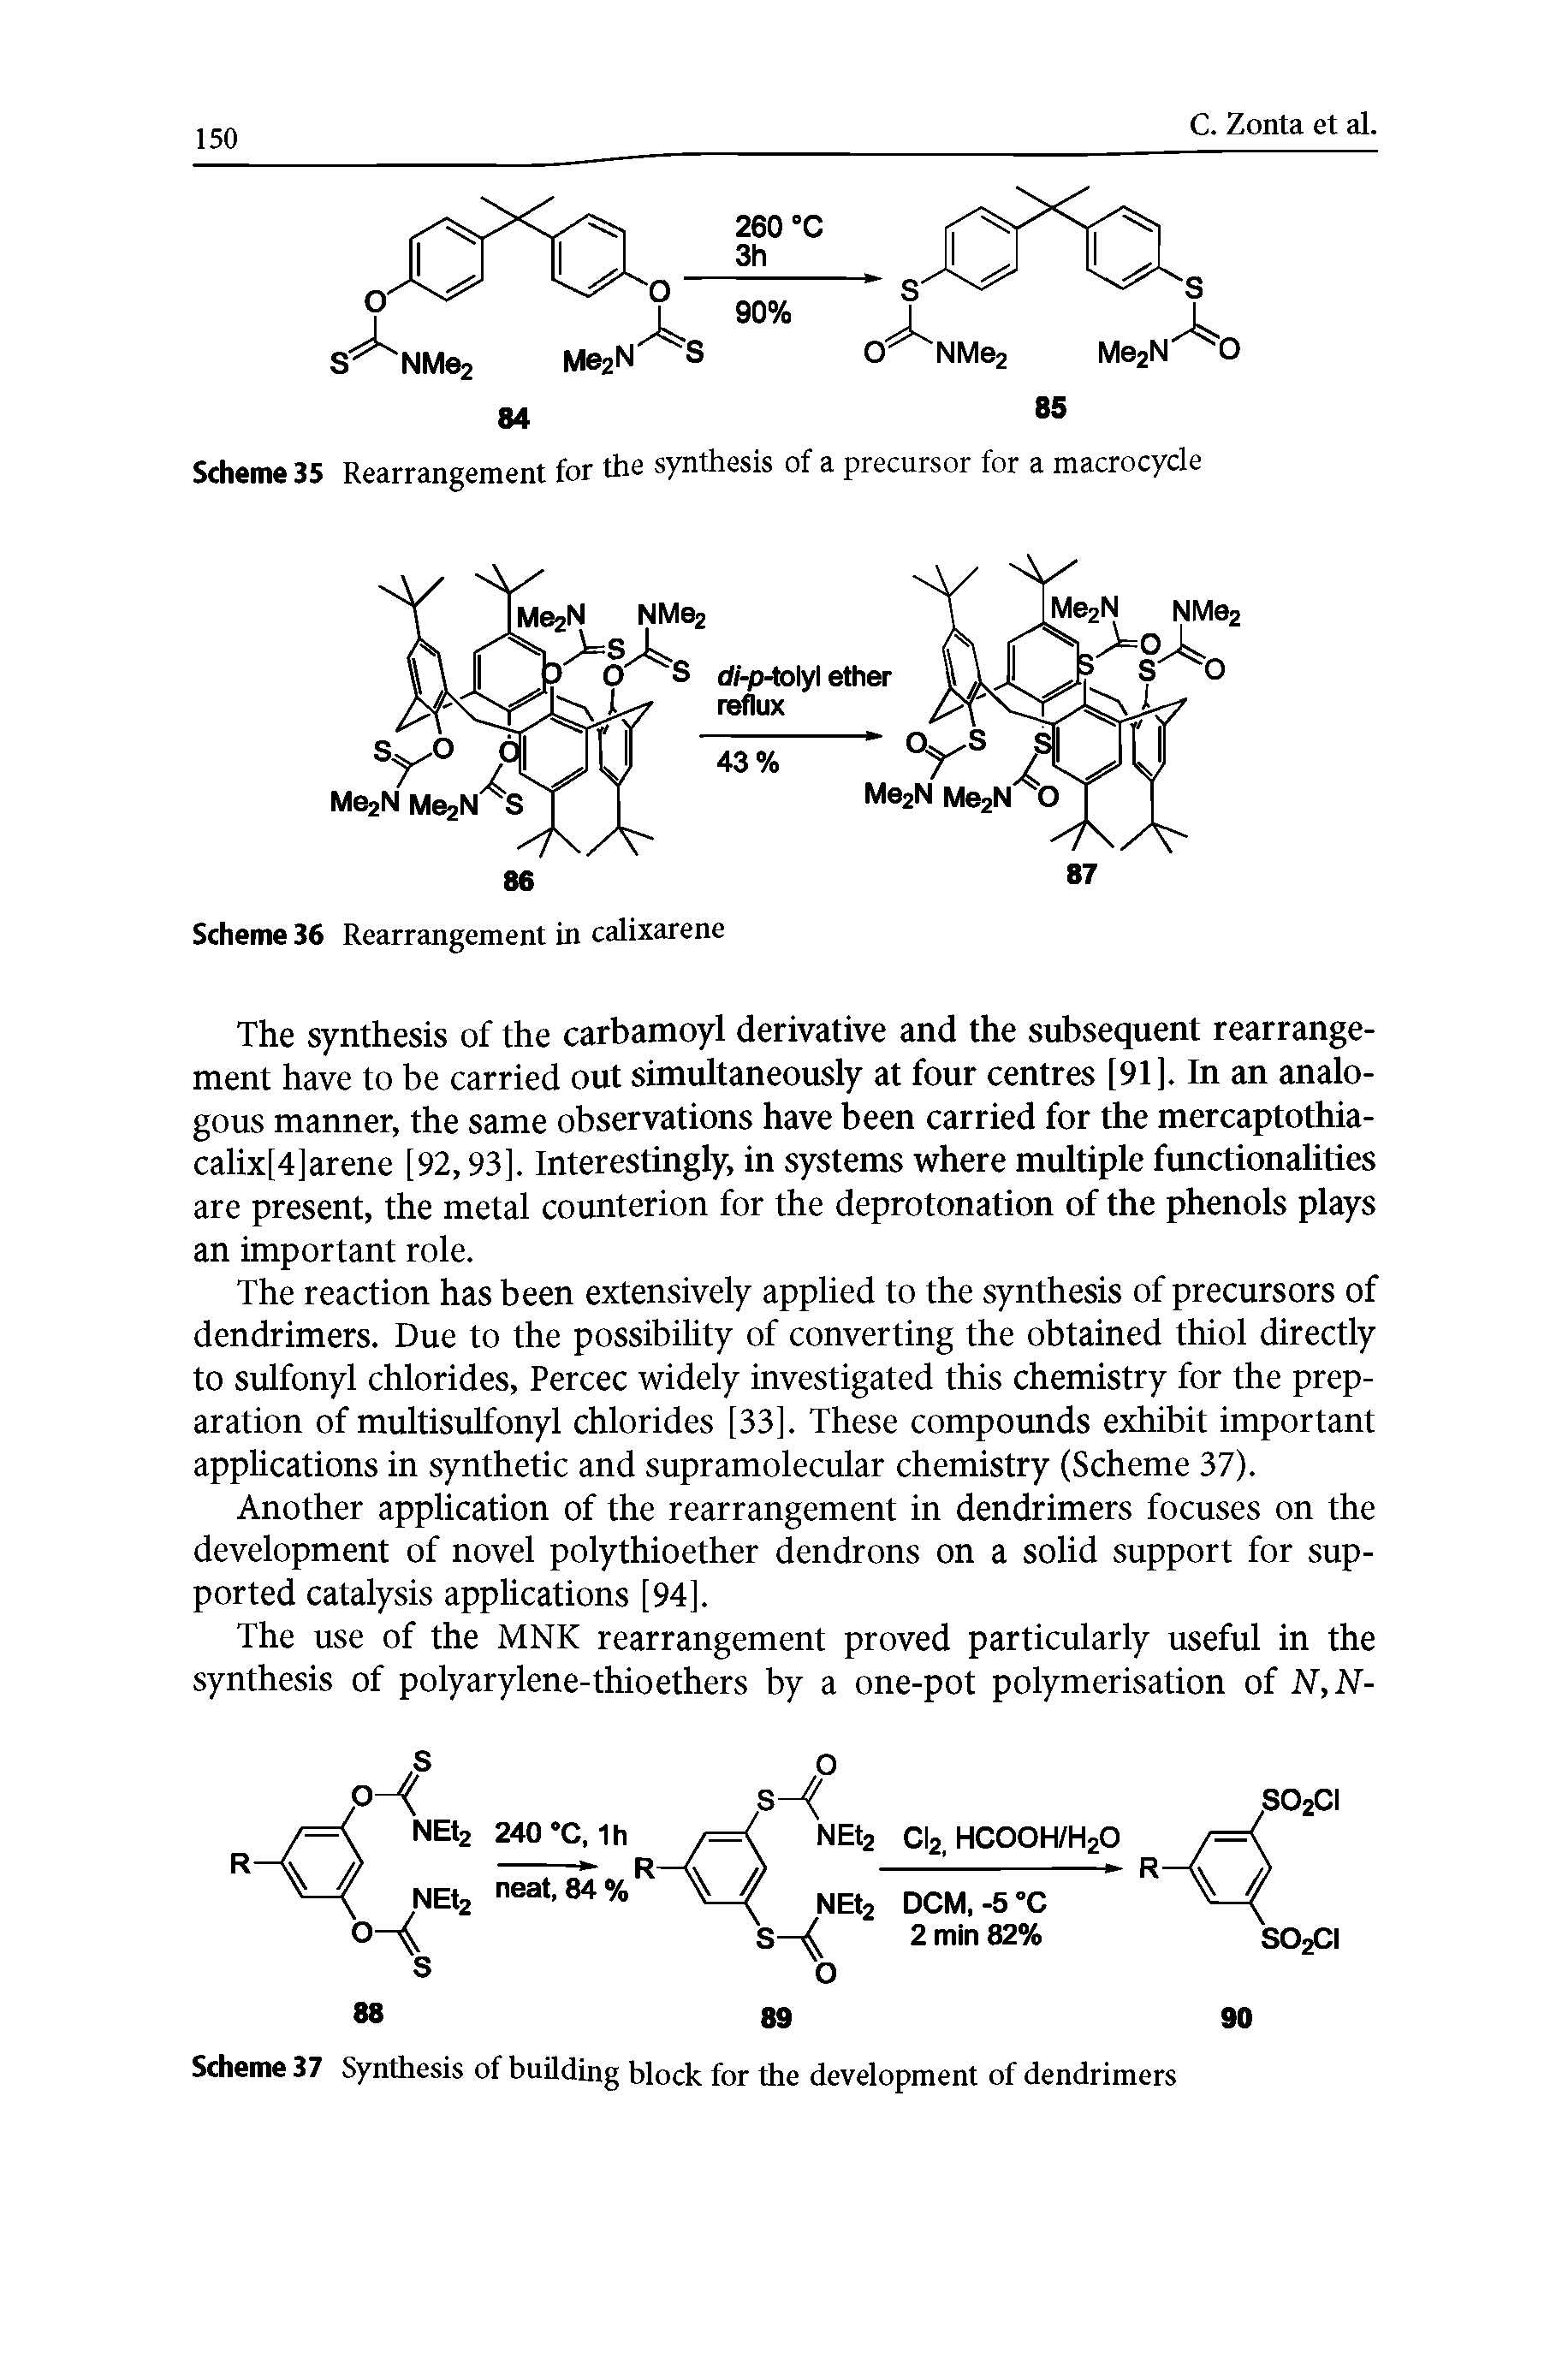 Scheme 37 Synthesis of building block for the development of dendrimers...